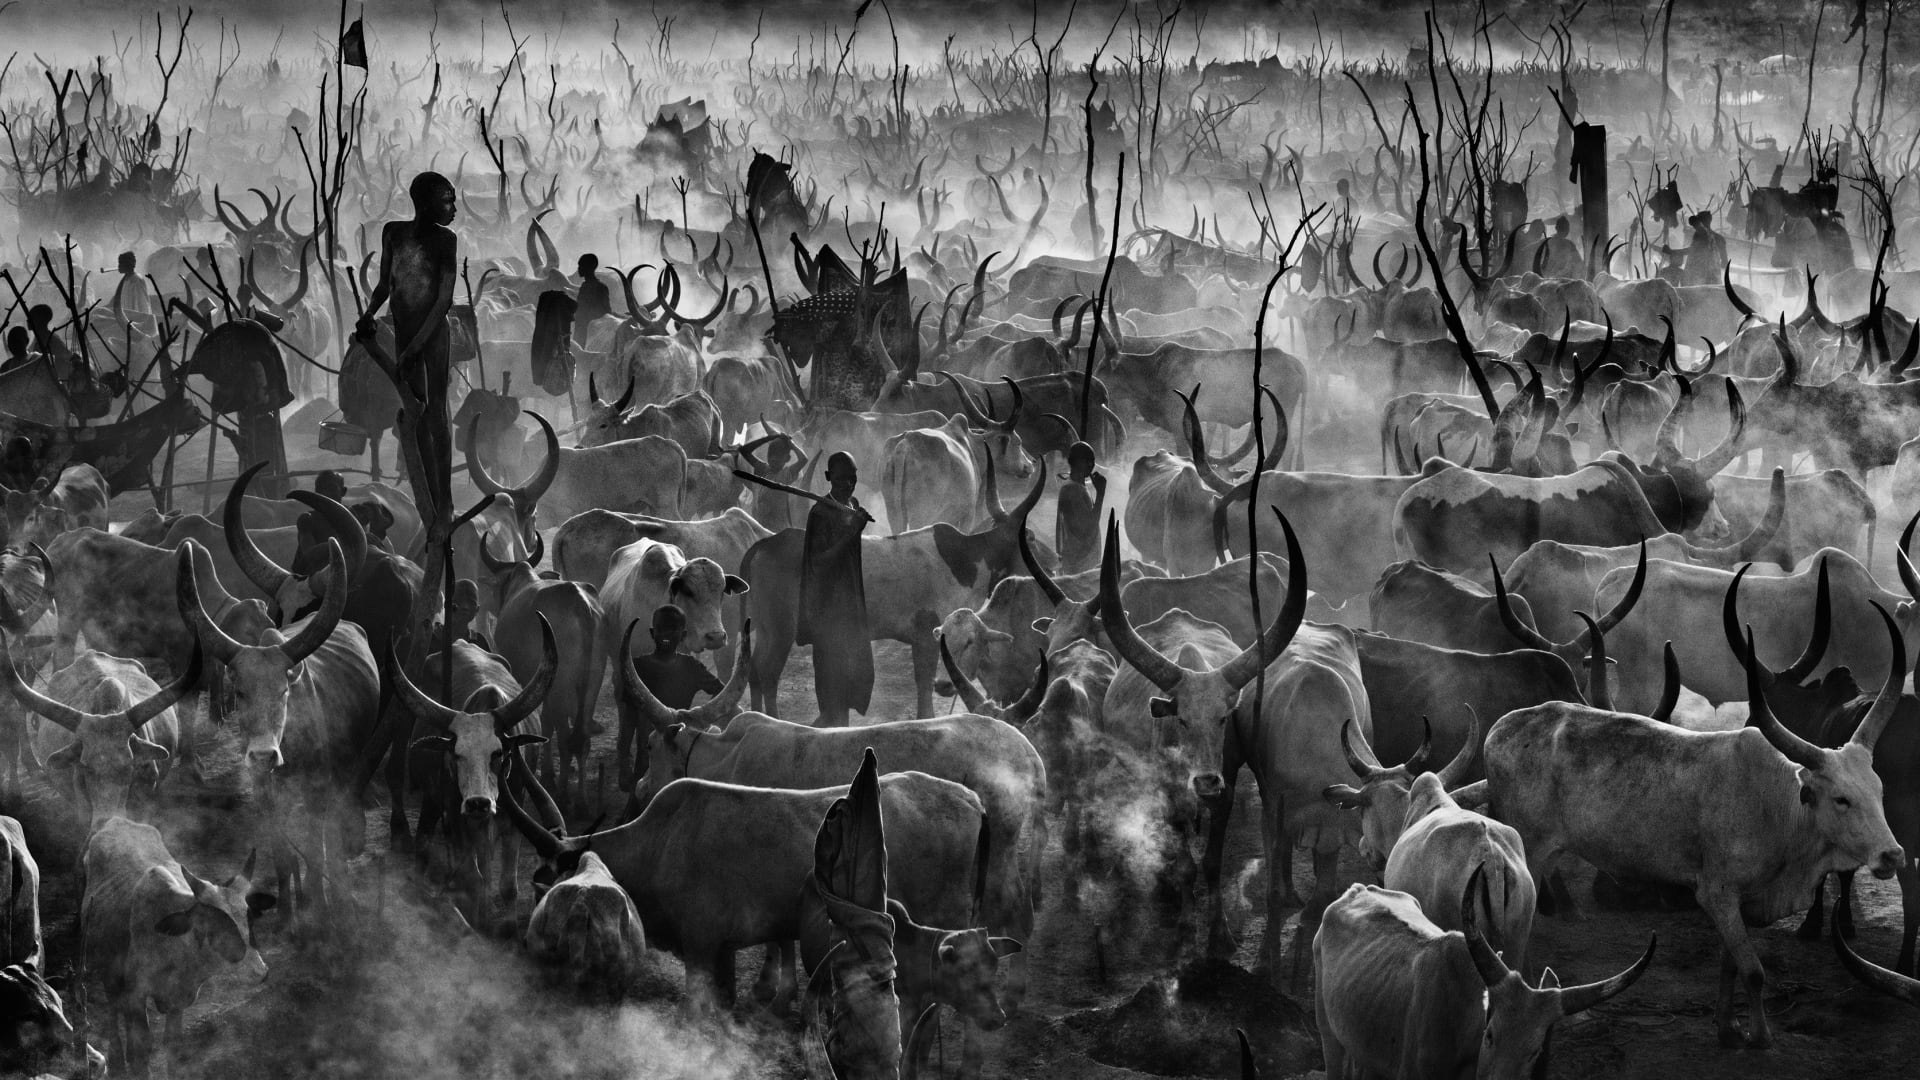 His work has earned him millions .. Celebrity and wildlife photographer reveals the secrets behind his most iconic images